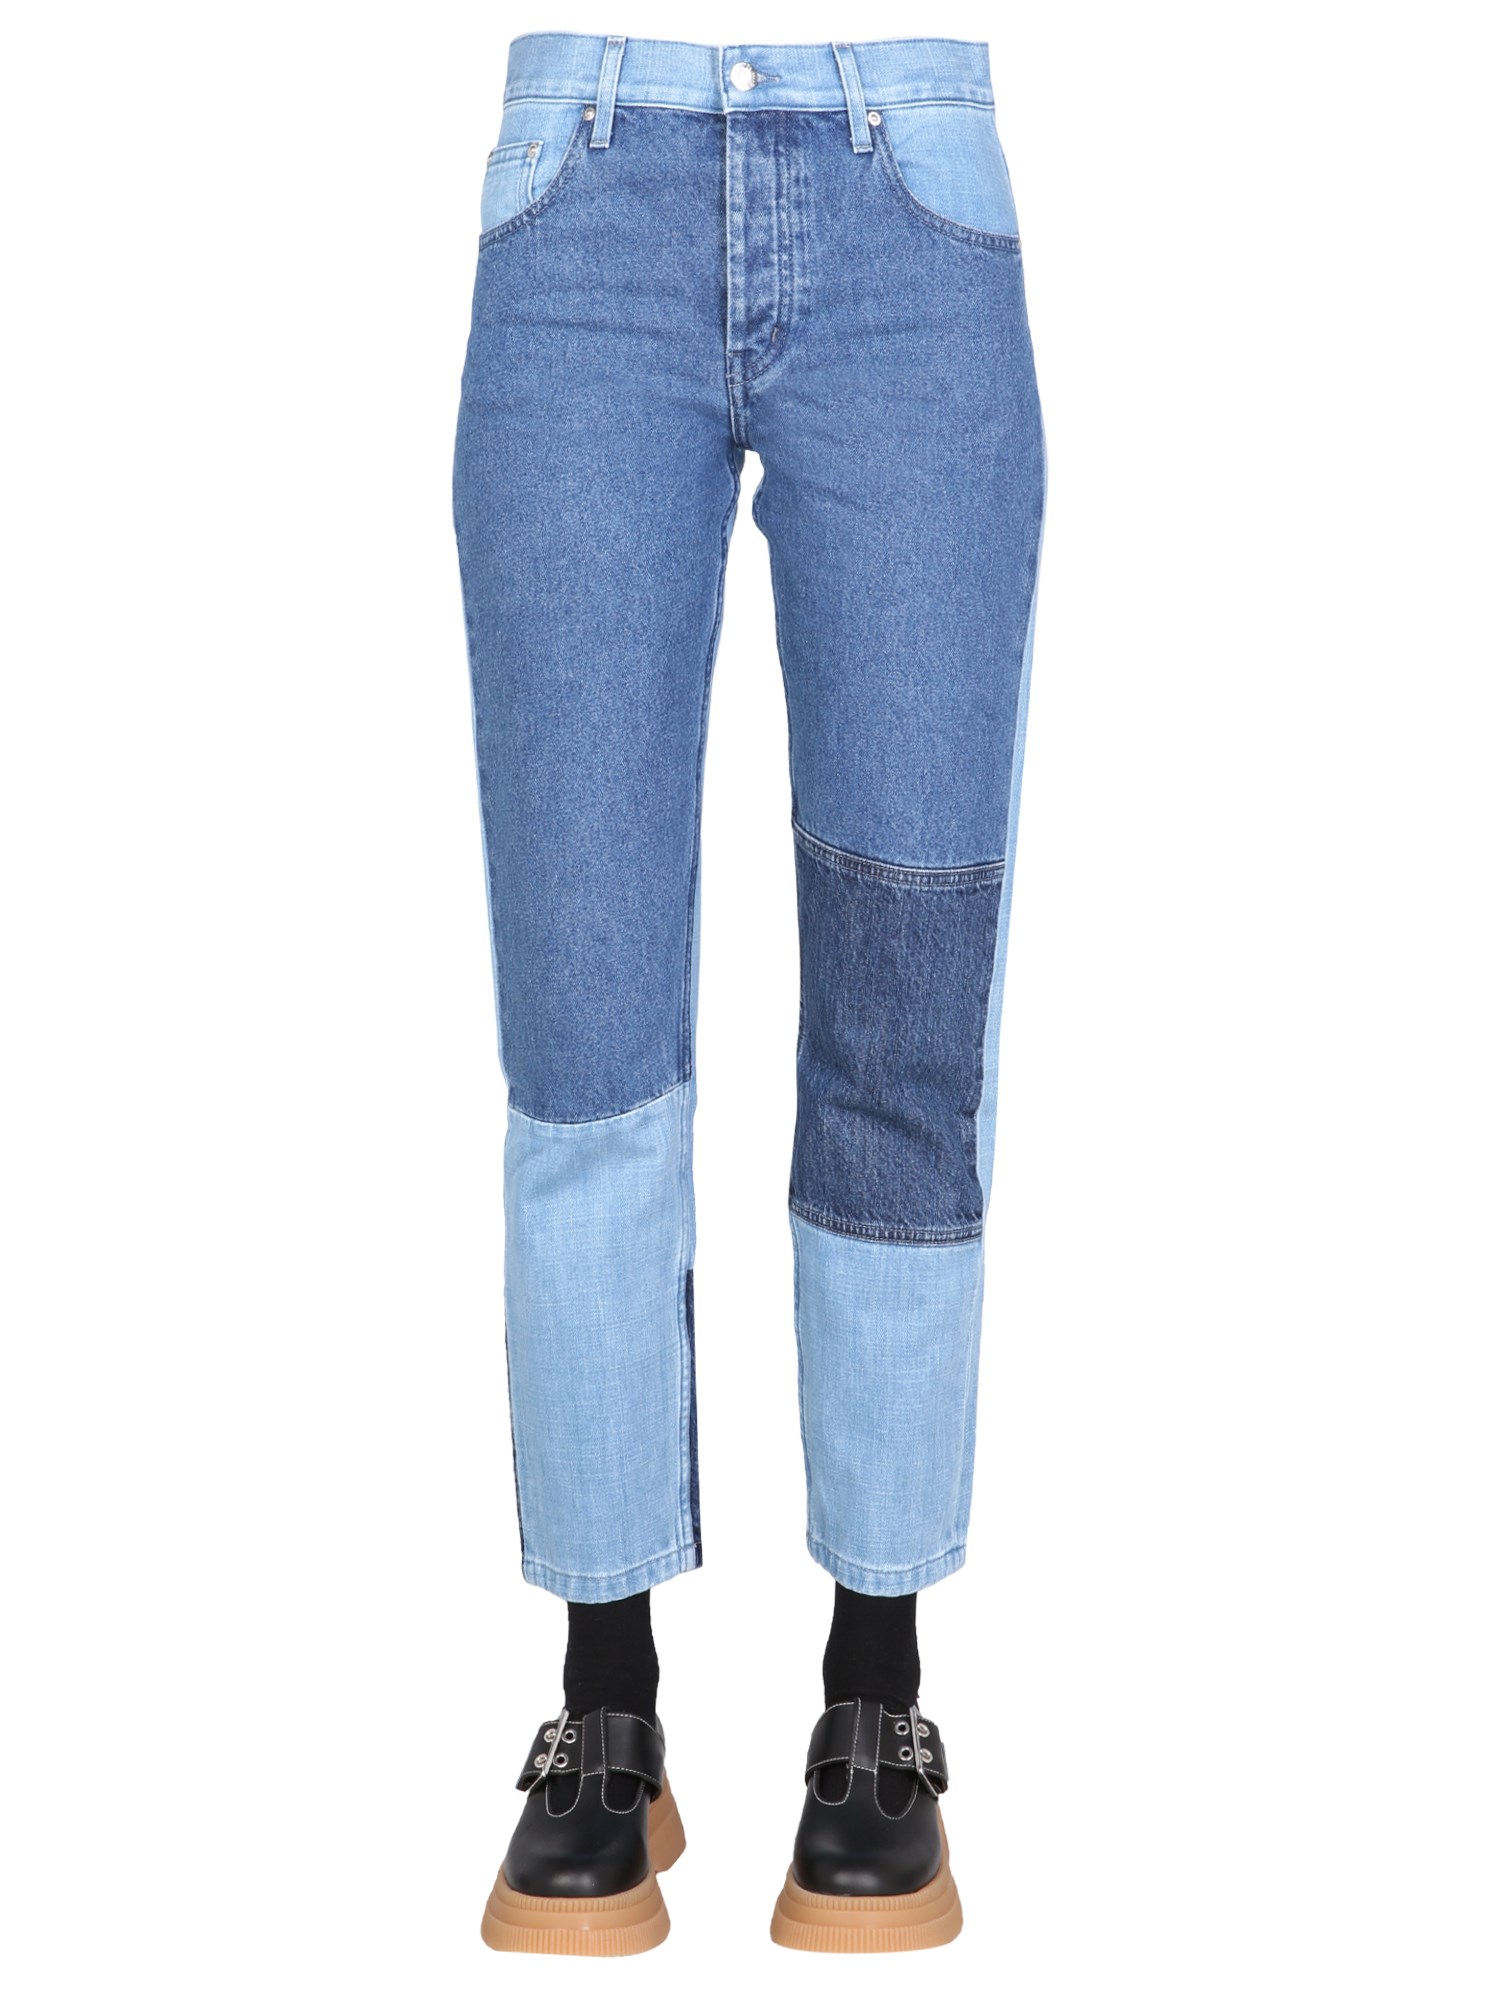 helmut lang jeans with contrasting panels